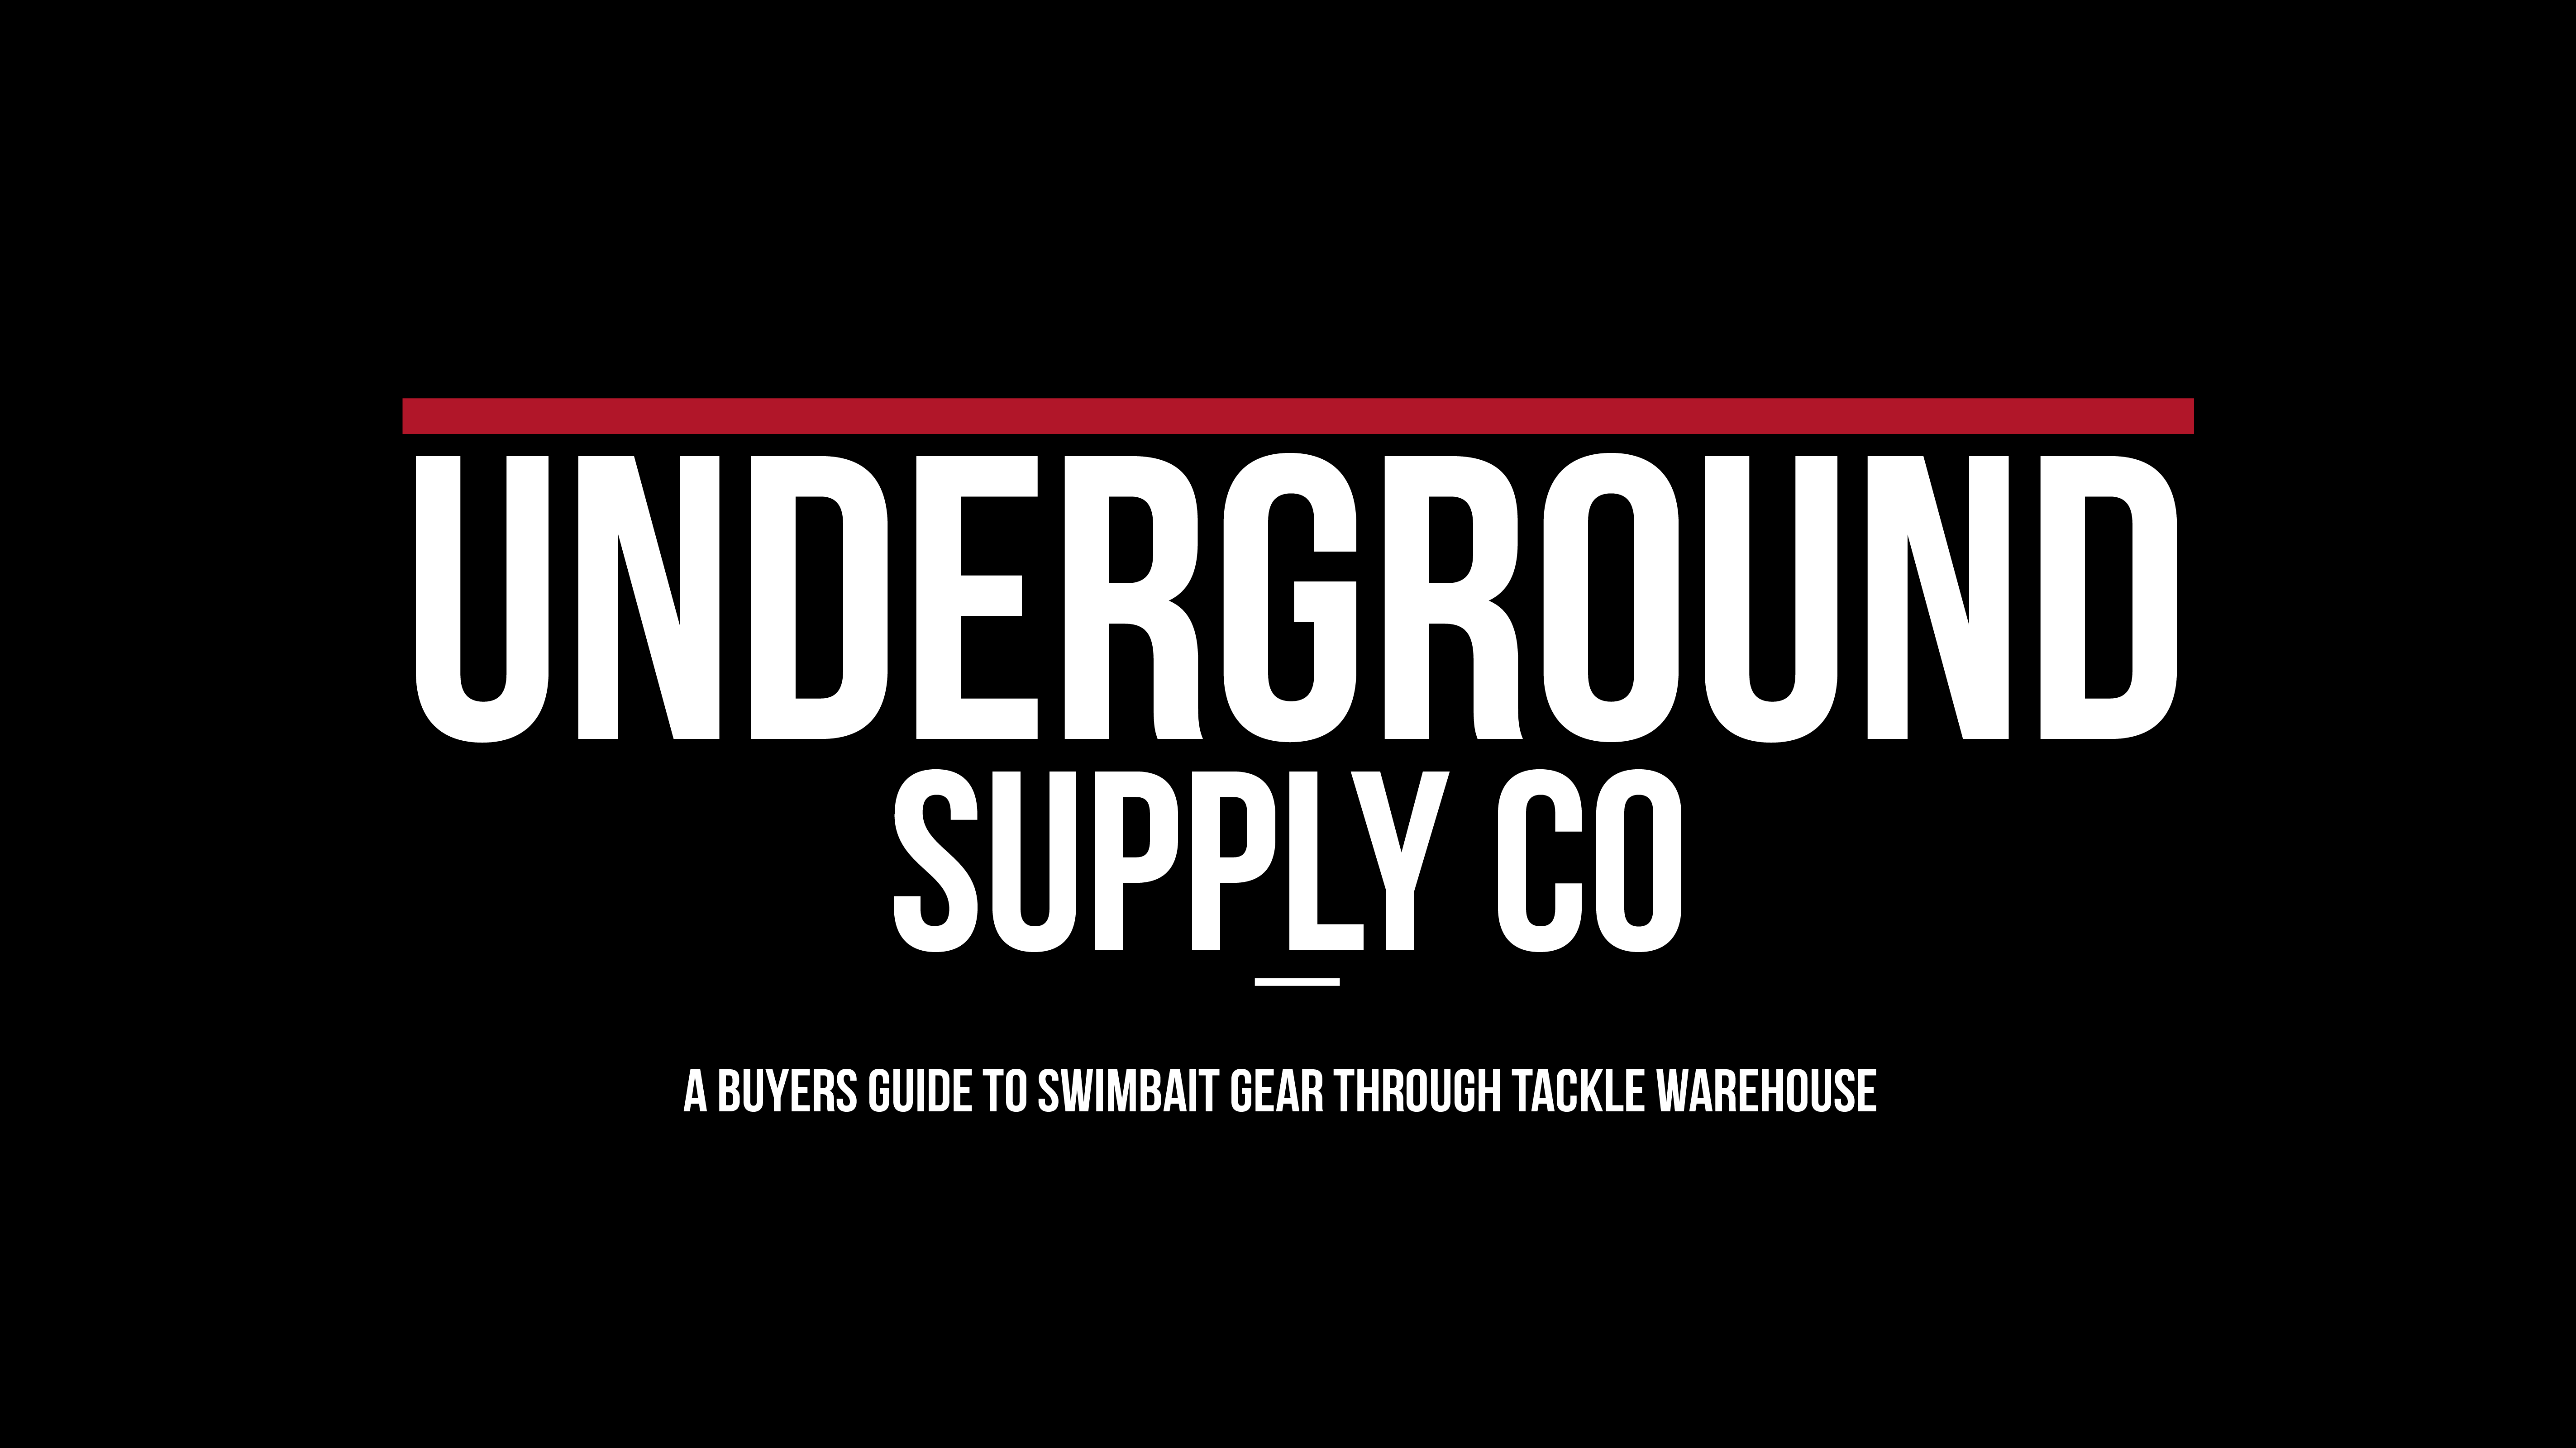 Underground Supply Co  A Buyers Guide To Swimbait Gear Through